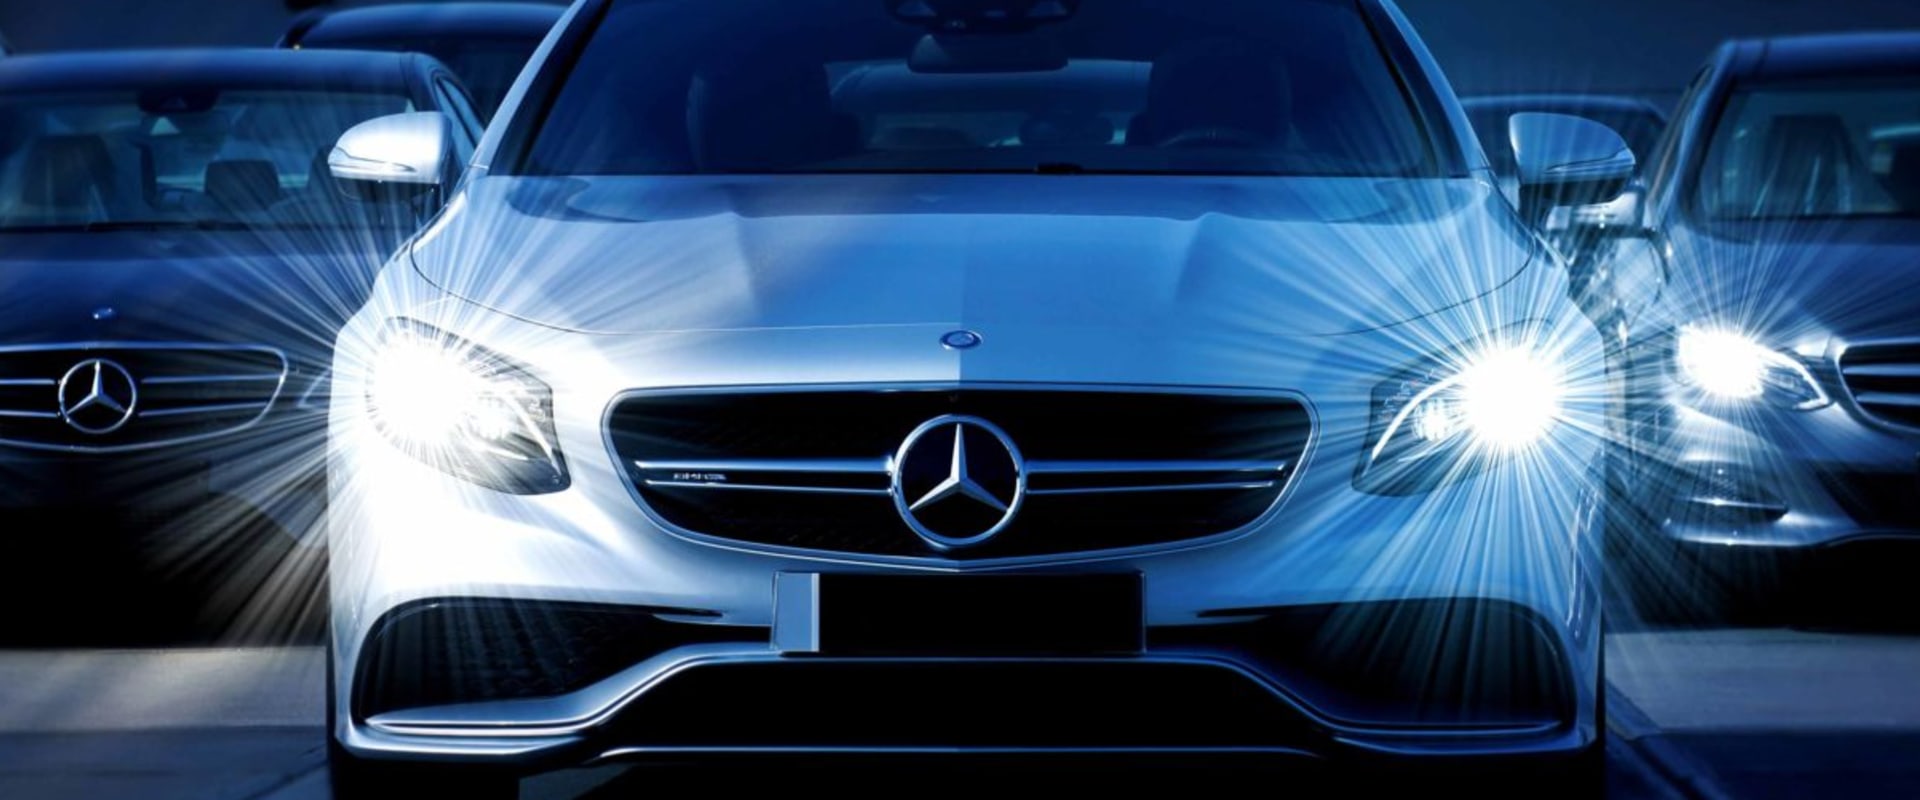 Luxury Car Services in Cedar Park - Get the Best Service Possible